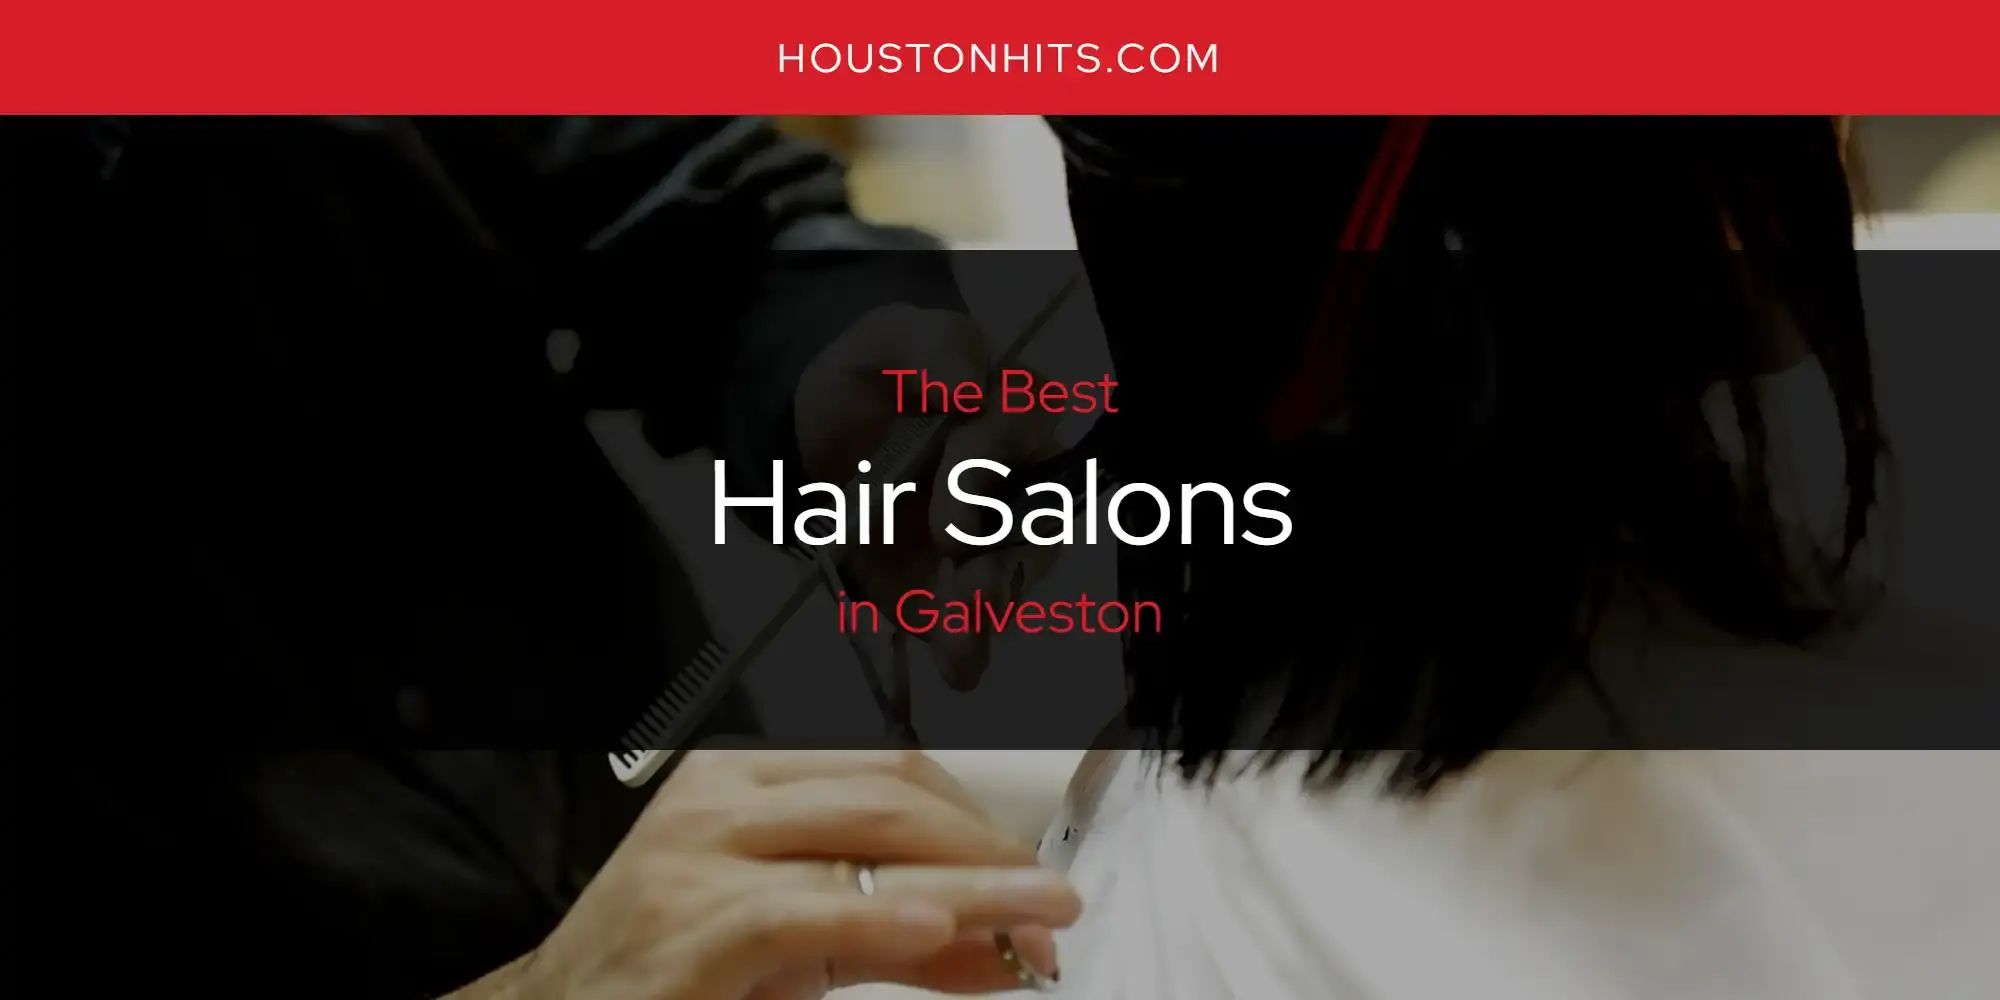 Best Hair Salons in Galveston? Here's the Top 17